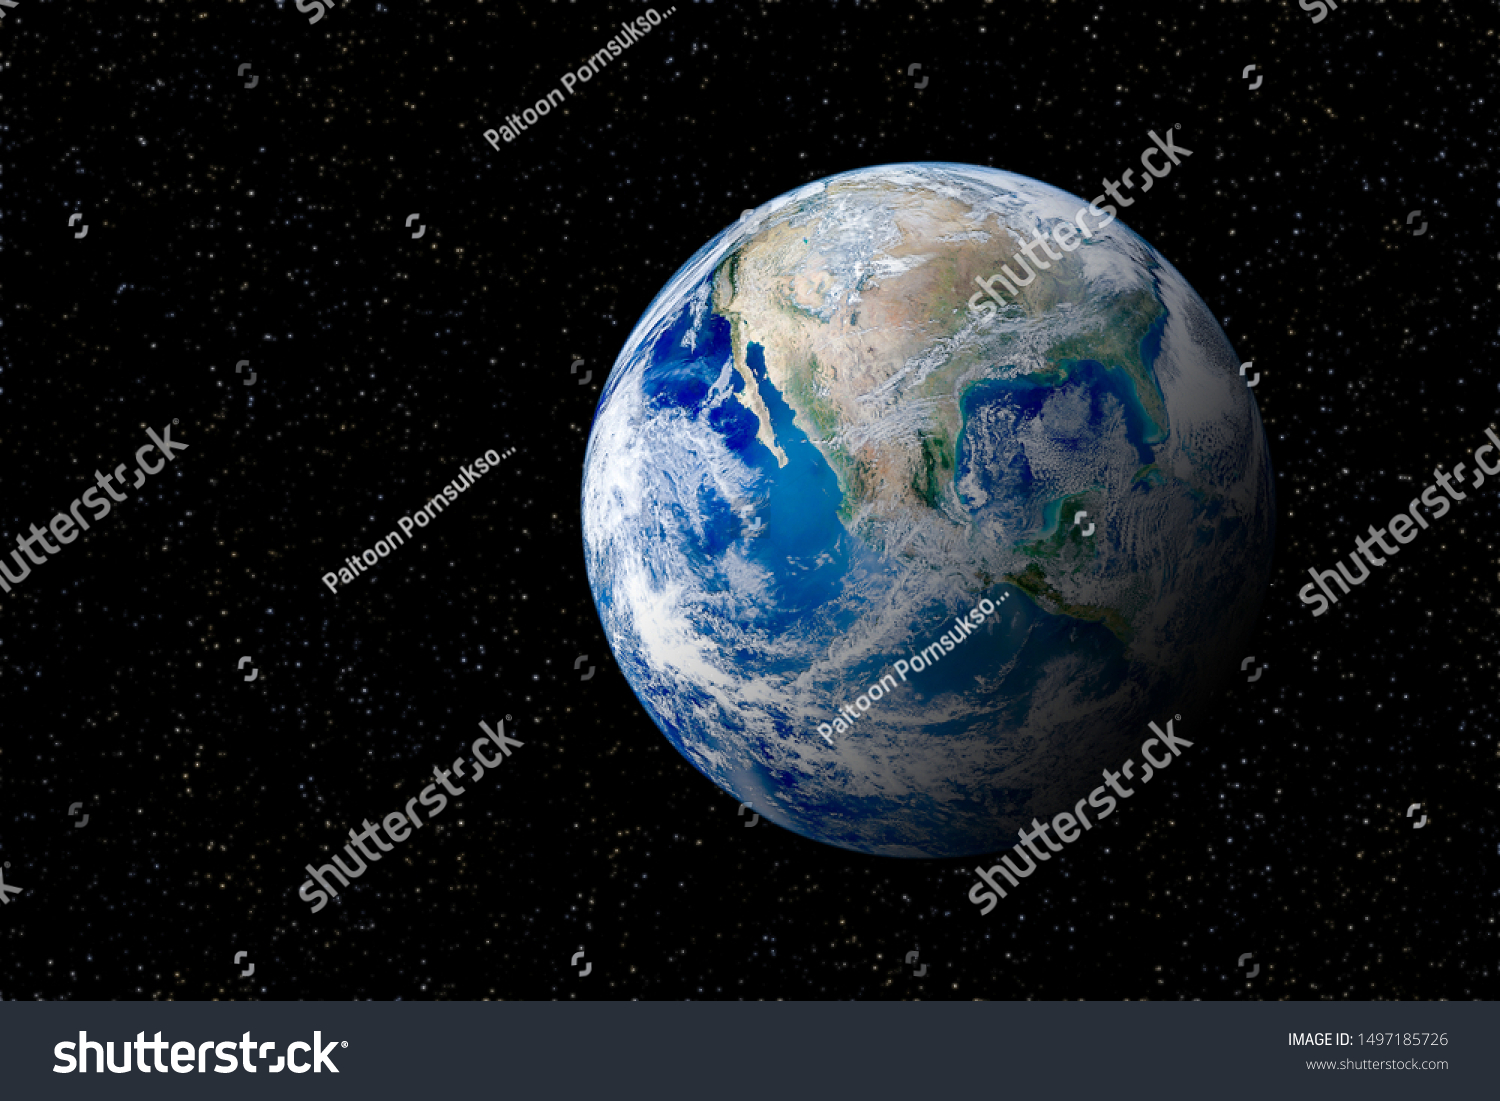 Blue planet earth globe view from space in night sky. (Elements of this image furnished by NASA.) #1497185726